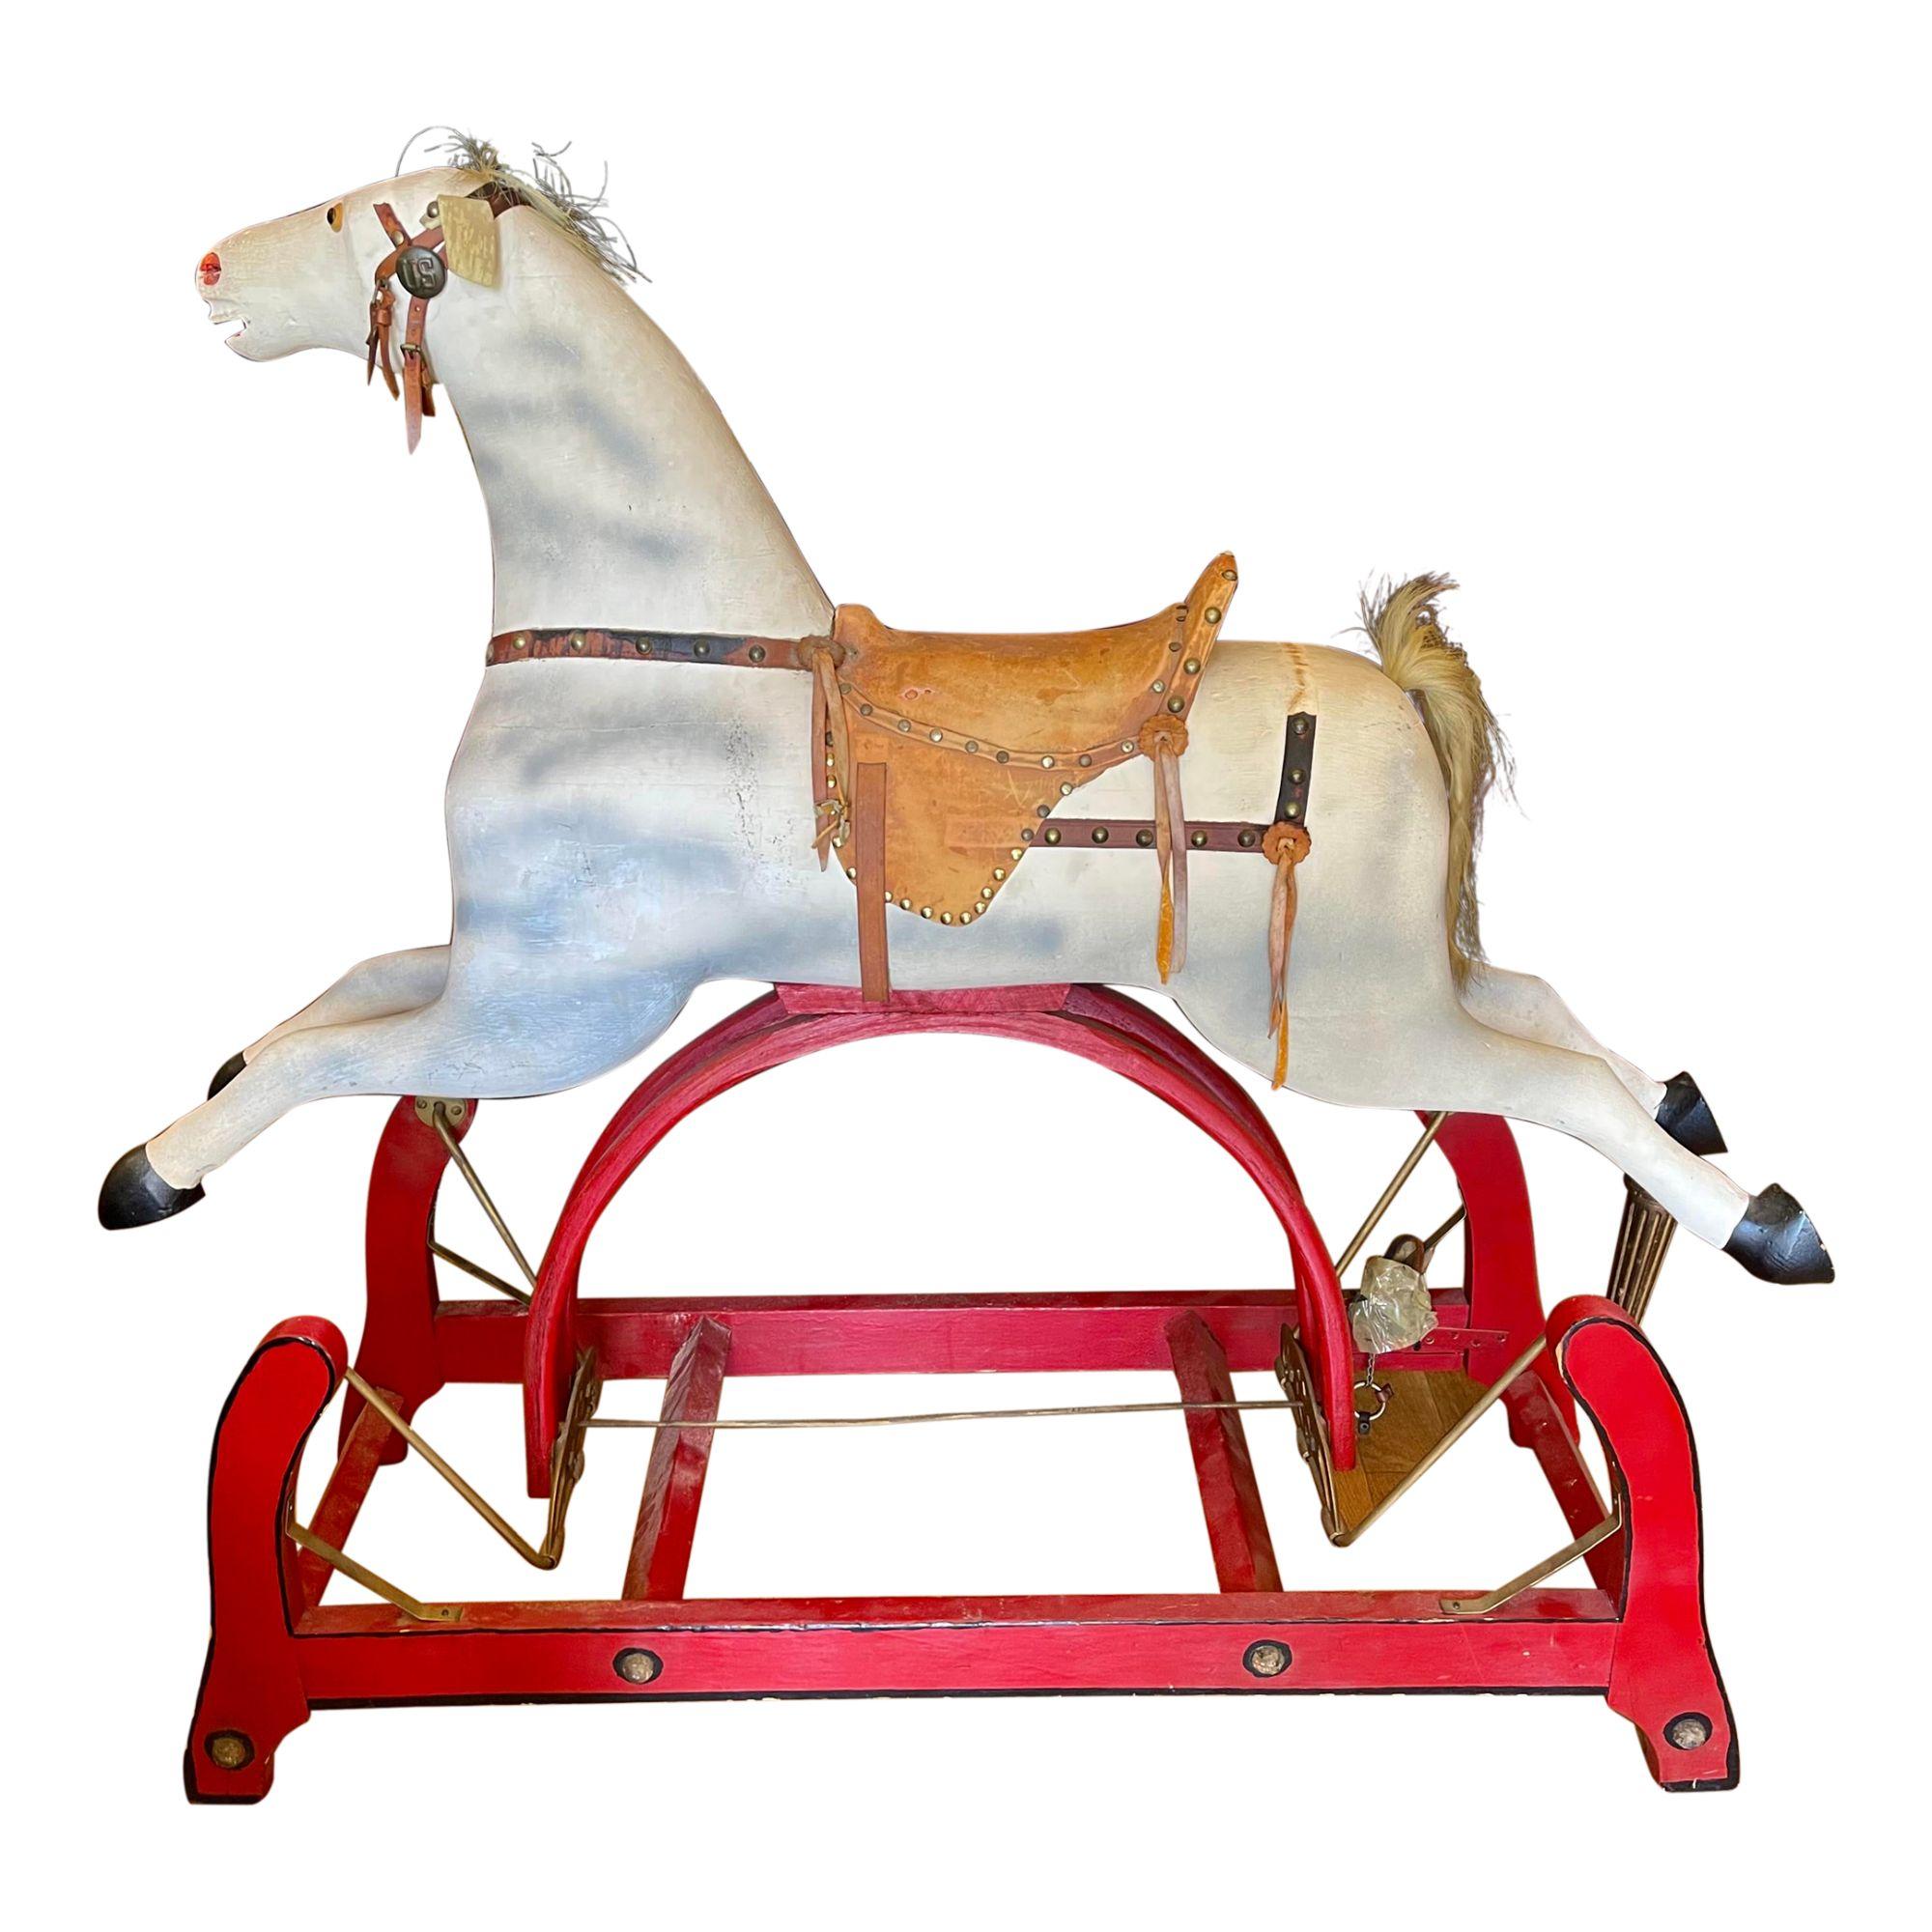 Antique American Primitive Handmade Gliding Rocking Hobby Horse For Sale